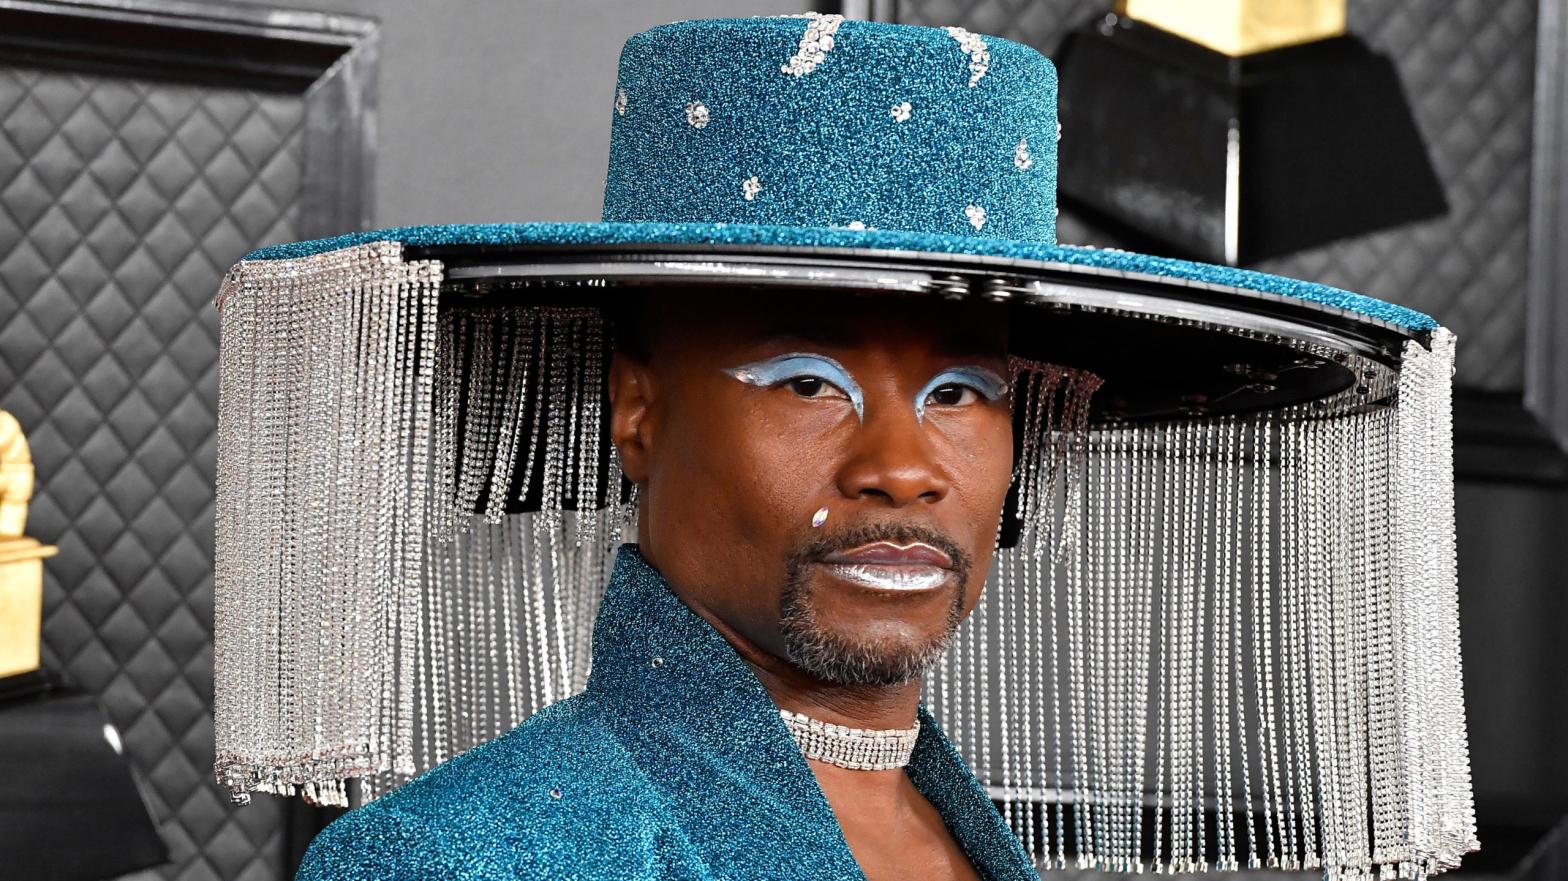 Billy Porter at the 62nd Grammy Awards. (Photo: Frazer Harrison, Getty Images)